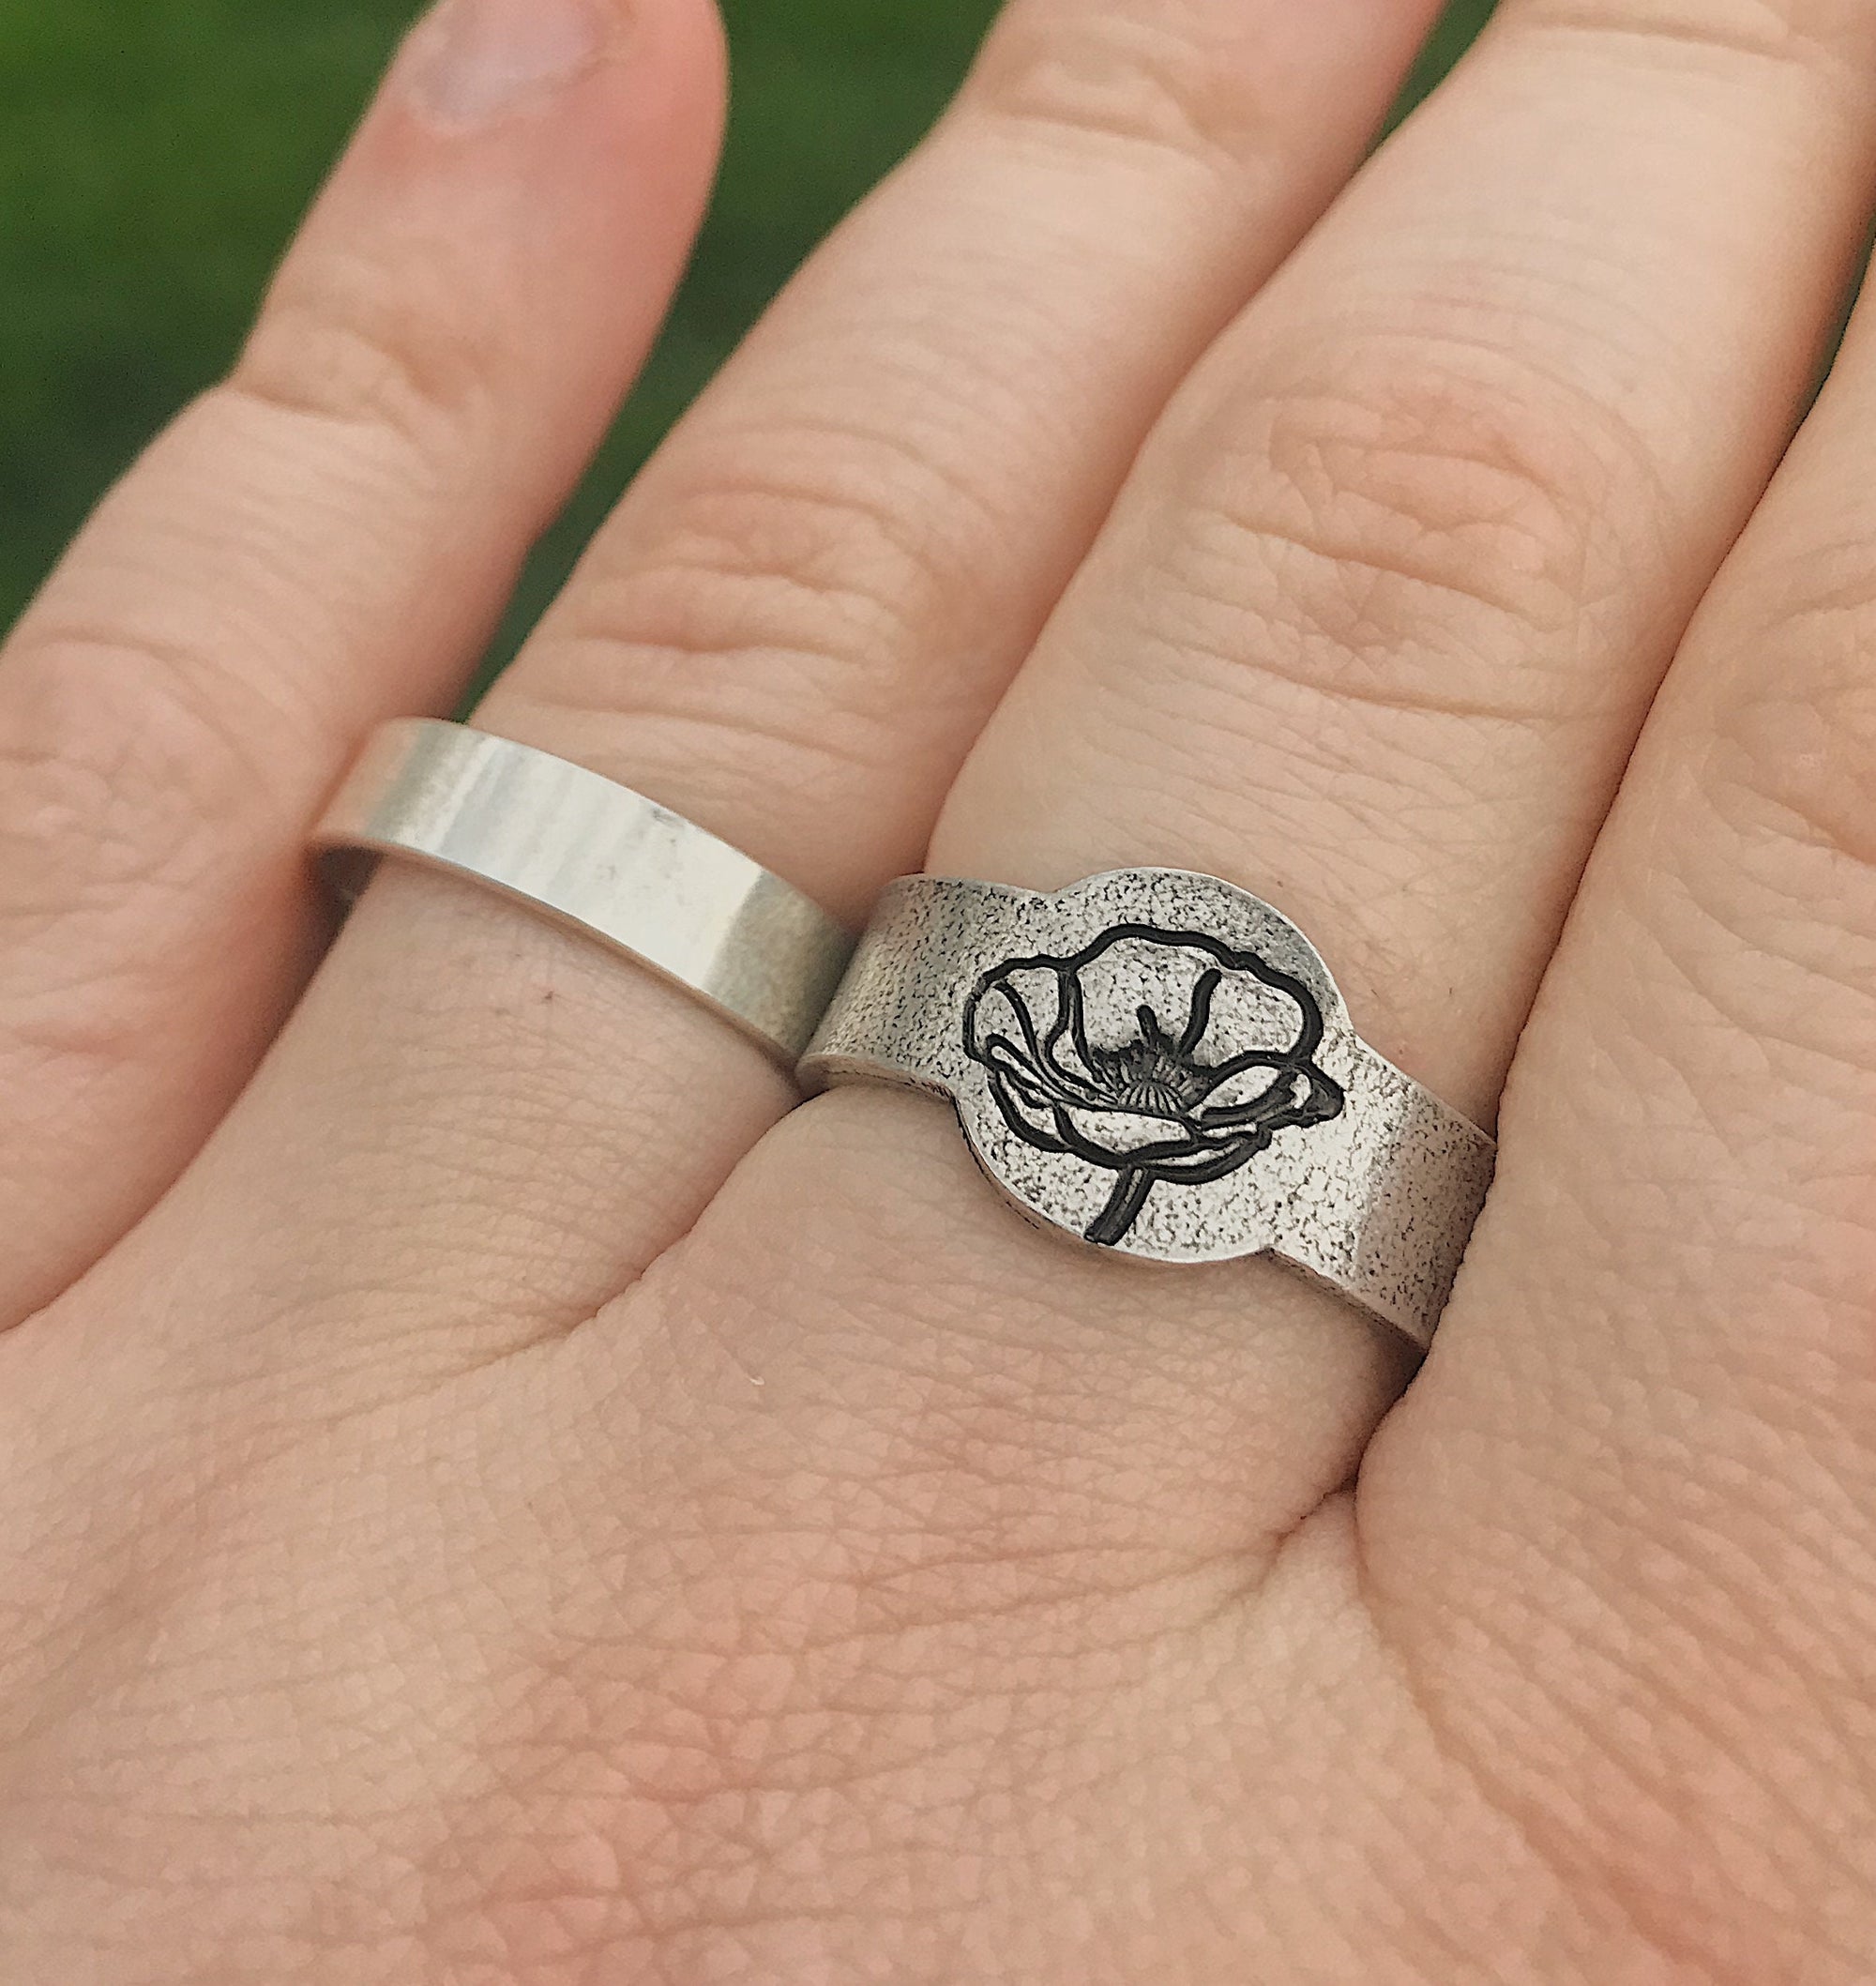 August Birth Flower Ring | Poppy Jewelry | Rustic Floral Signet Ring | Best Friend Birthday Gifts | Mother's Day Gift | Best Friend Ring